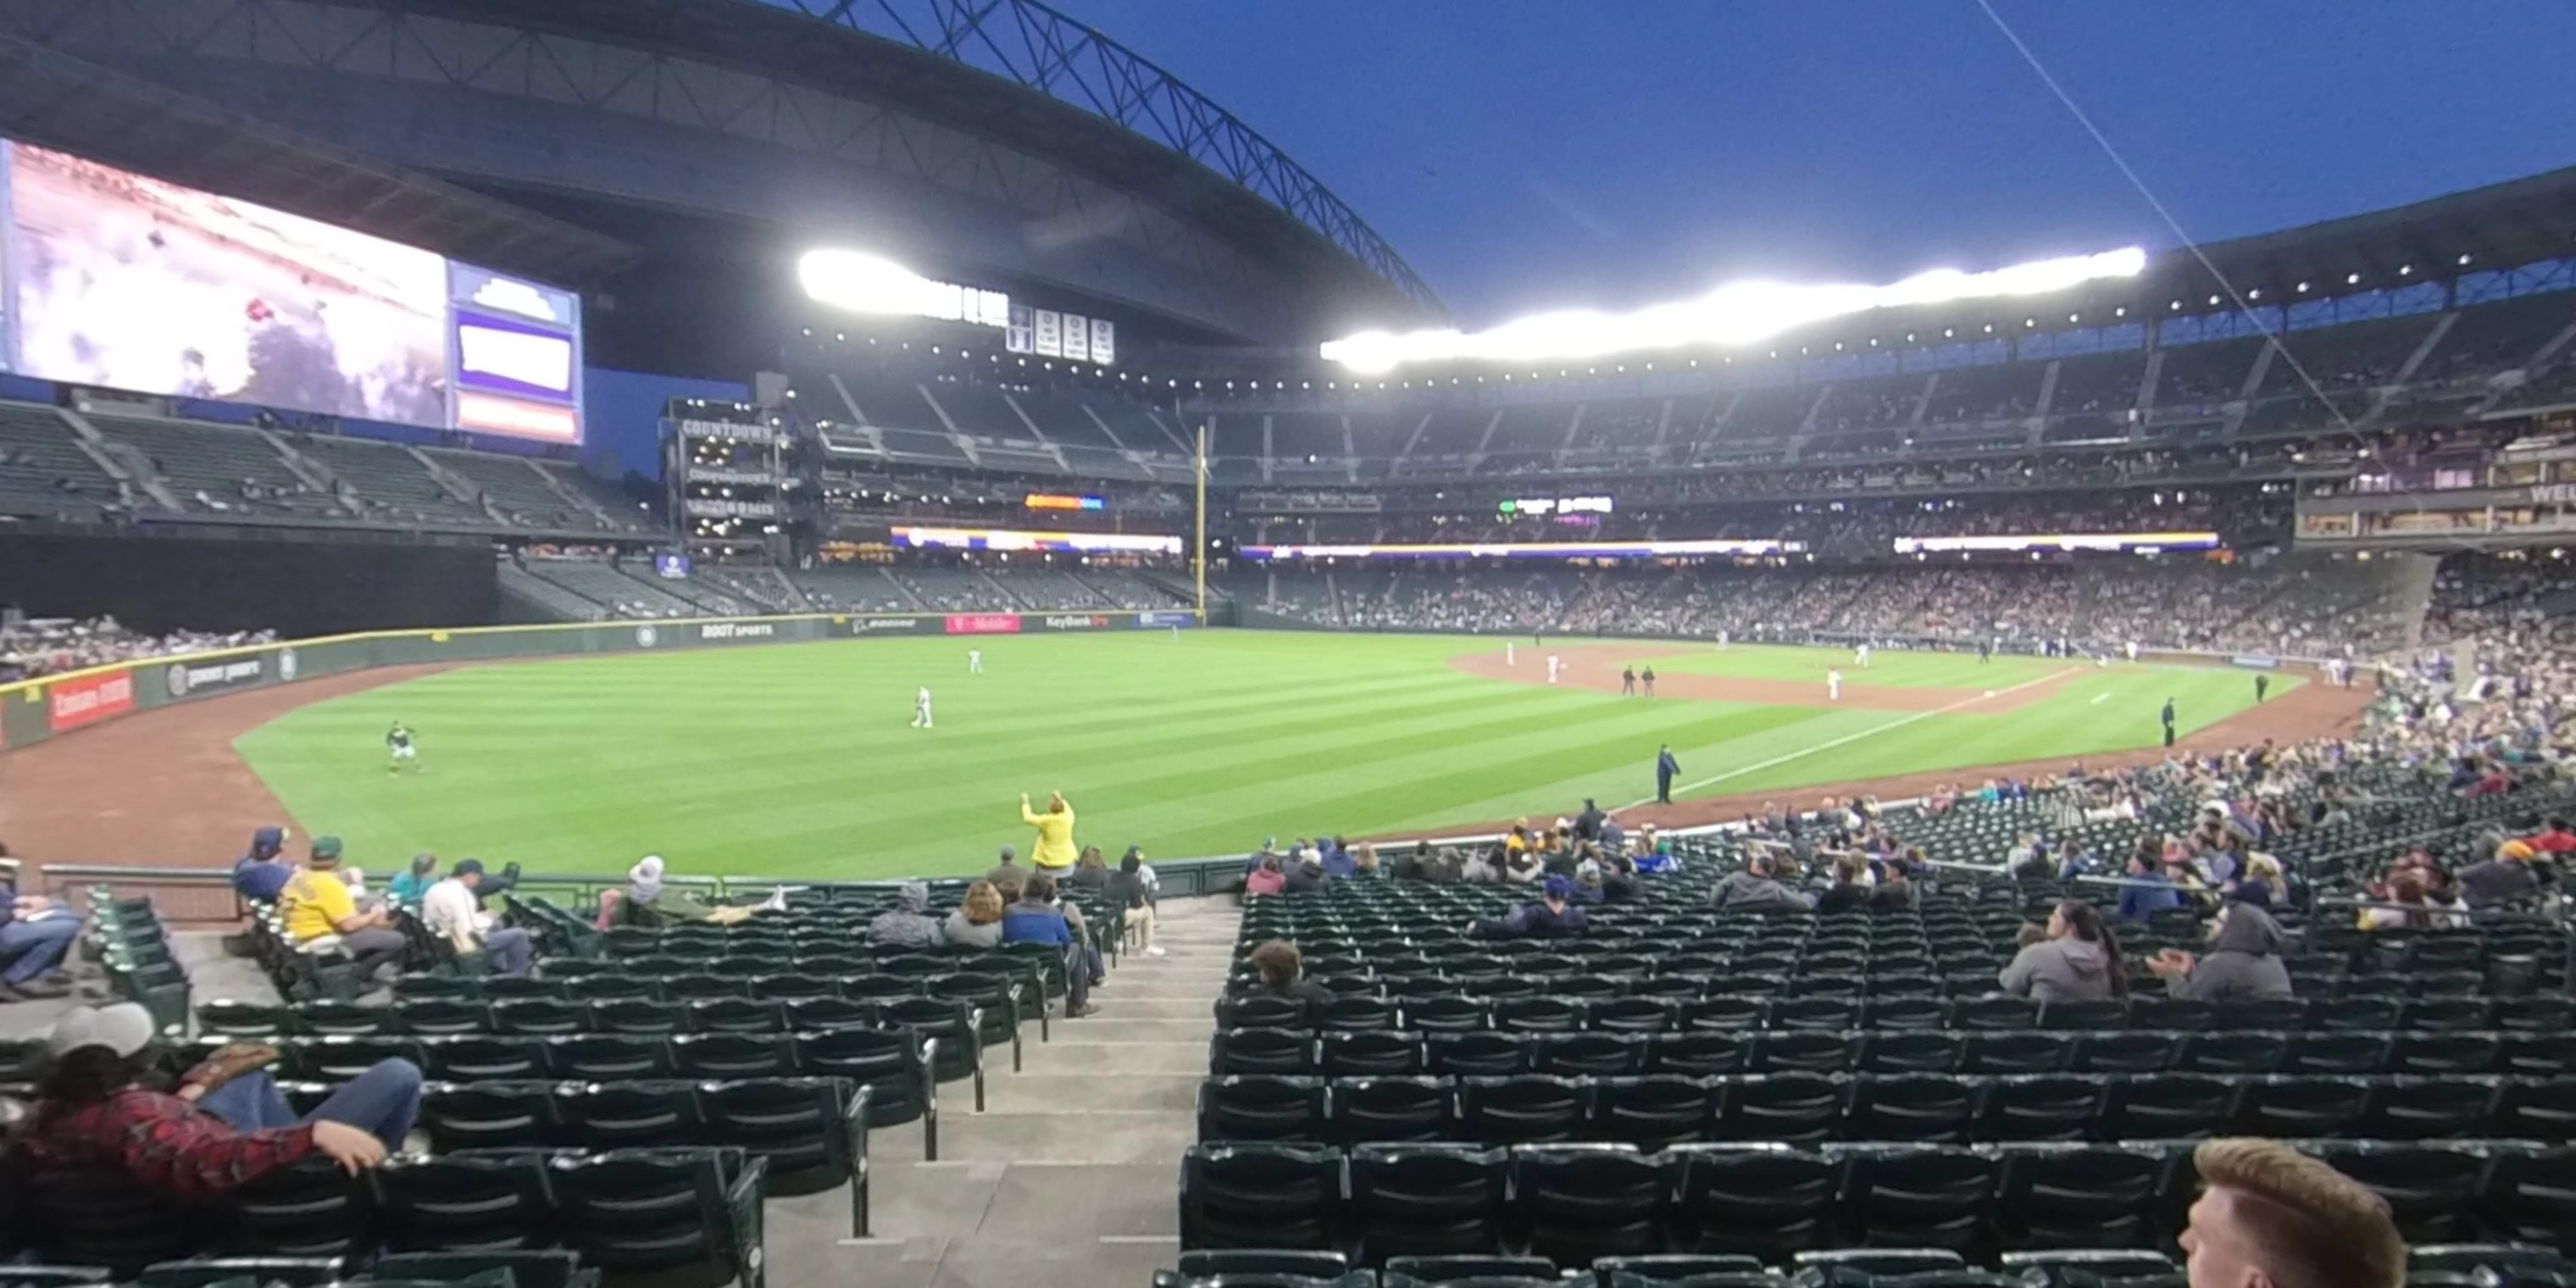 section 148 panoramic seat view  for baseball - t-mobile park